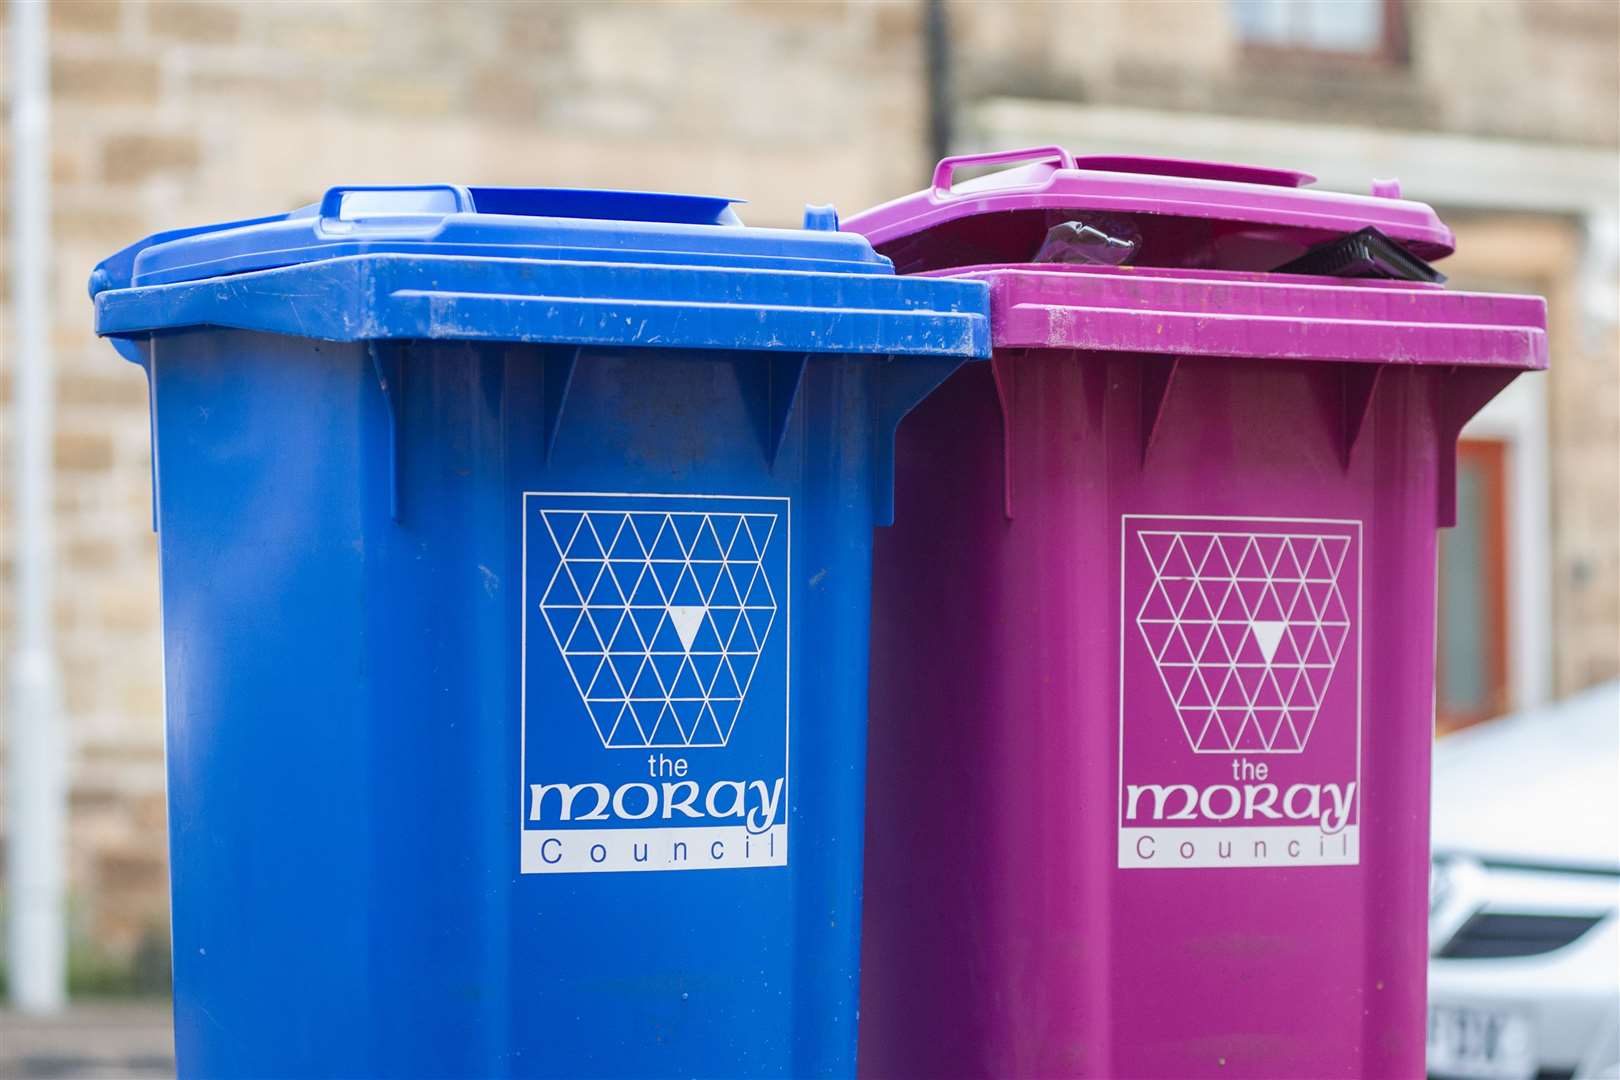 Good news on the purple bin front with more plastics now able to be recycled.